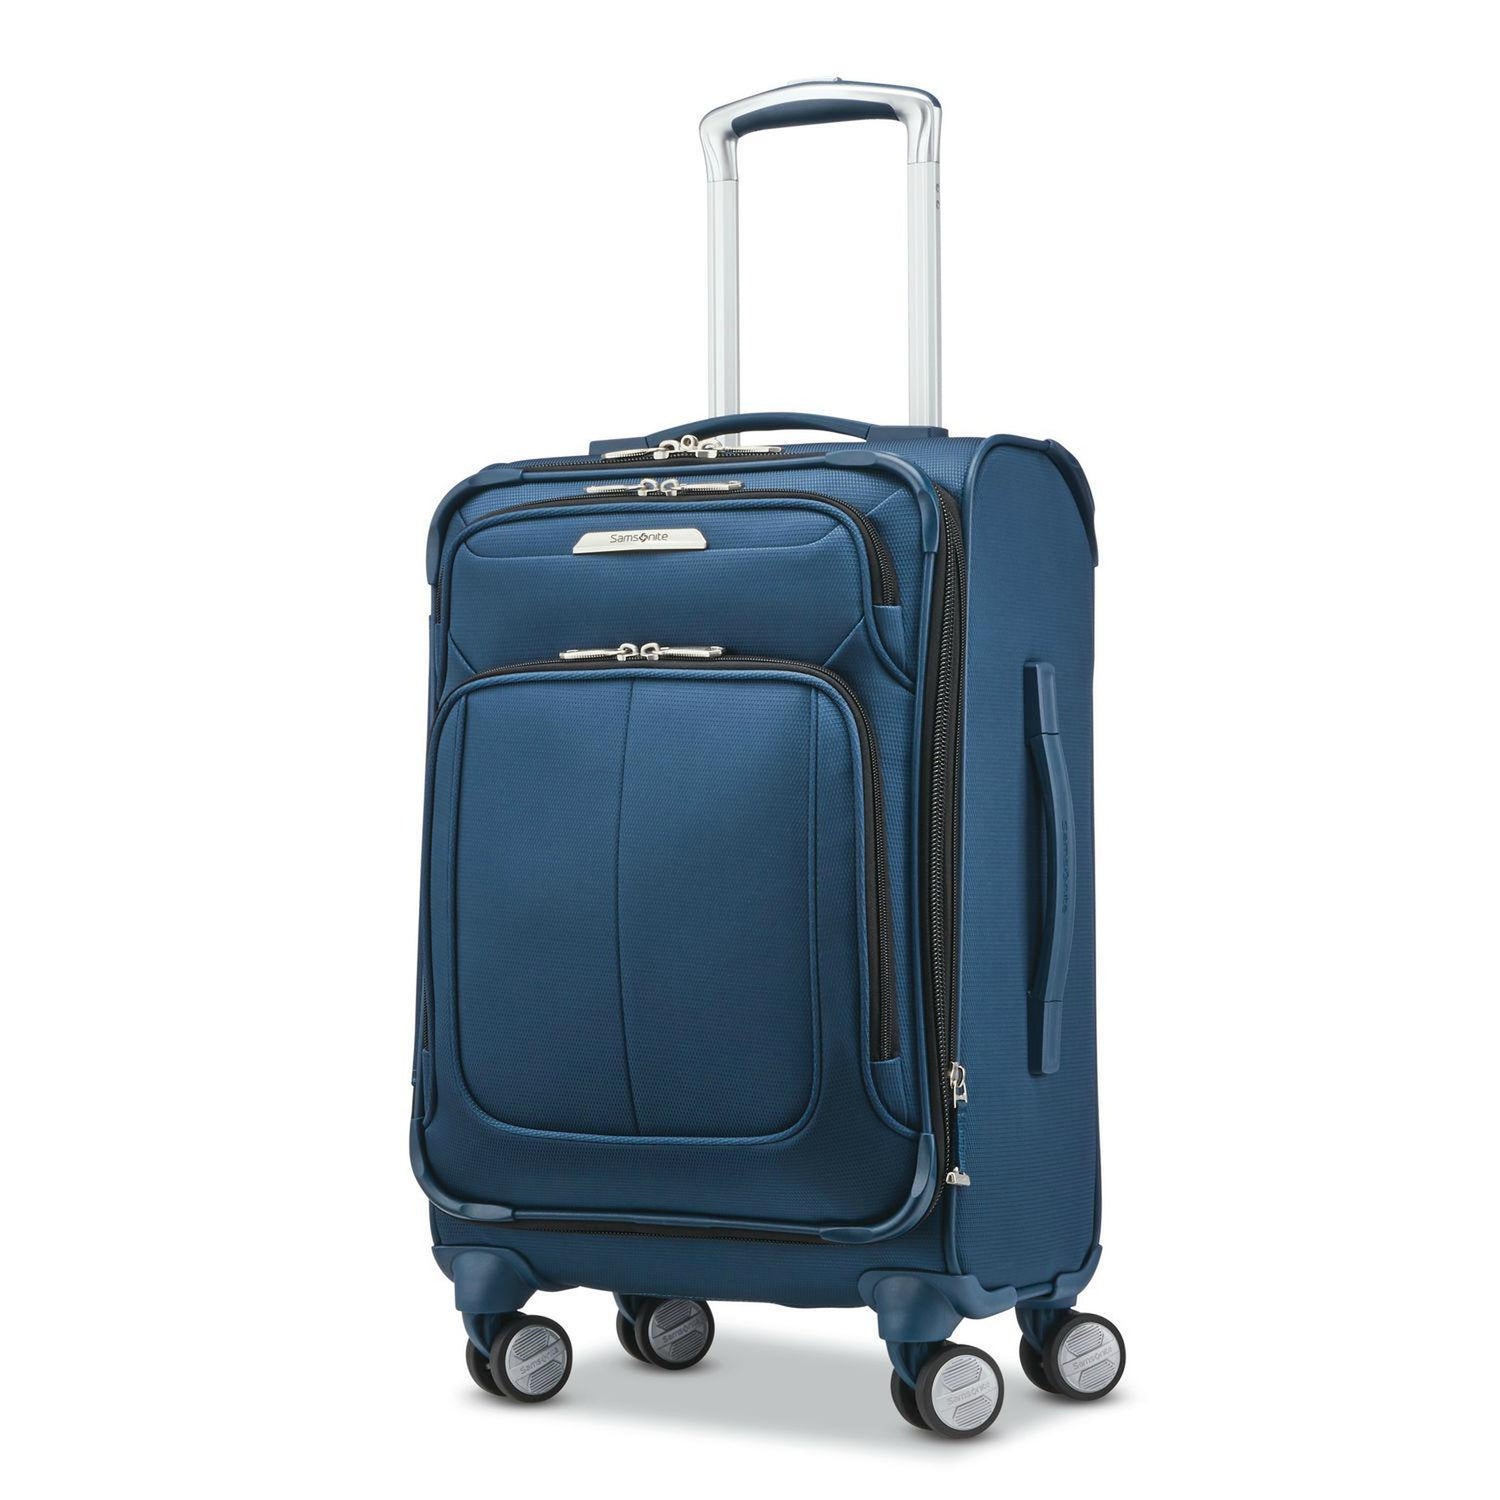 Samsonite Solyte DLX Carry On Expandable Spinner – Luggage Pros